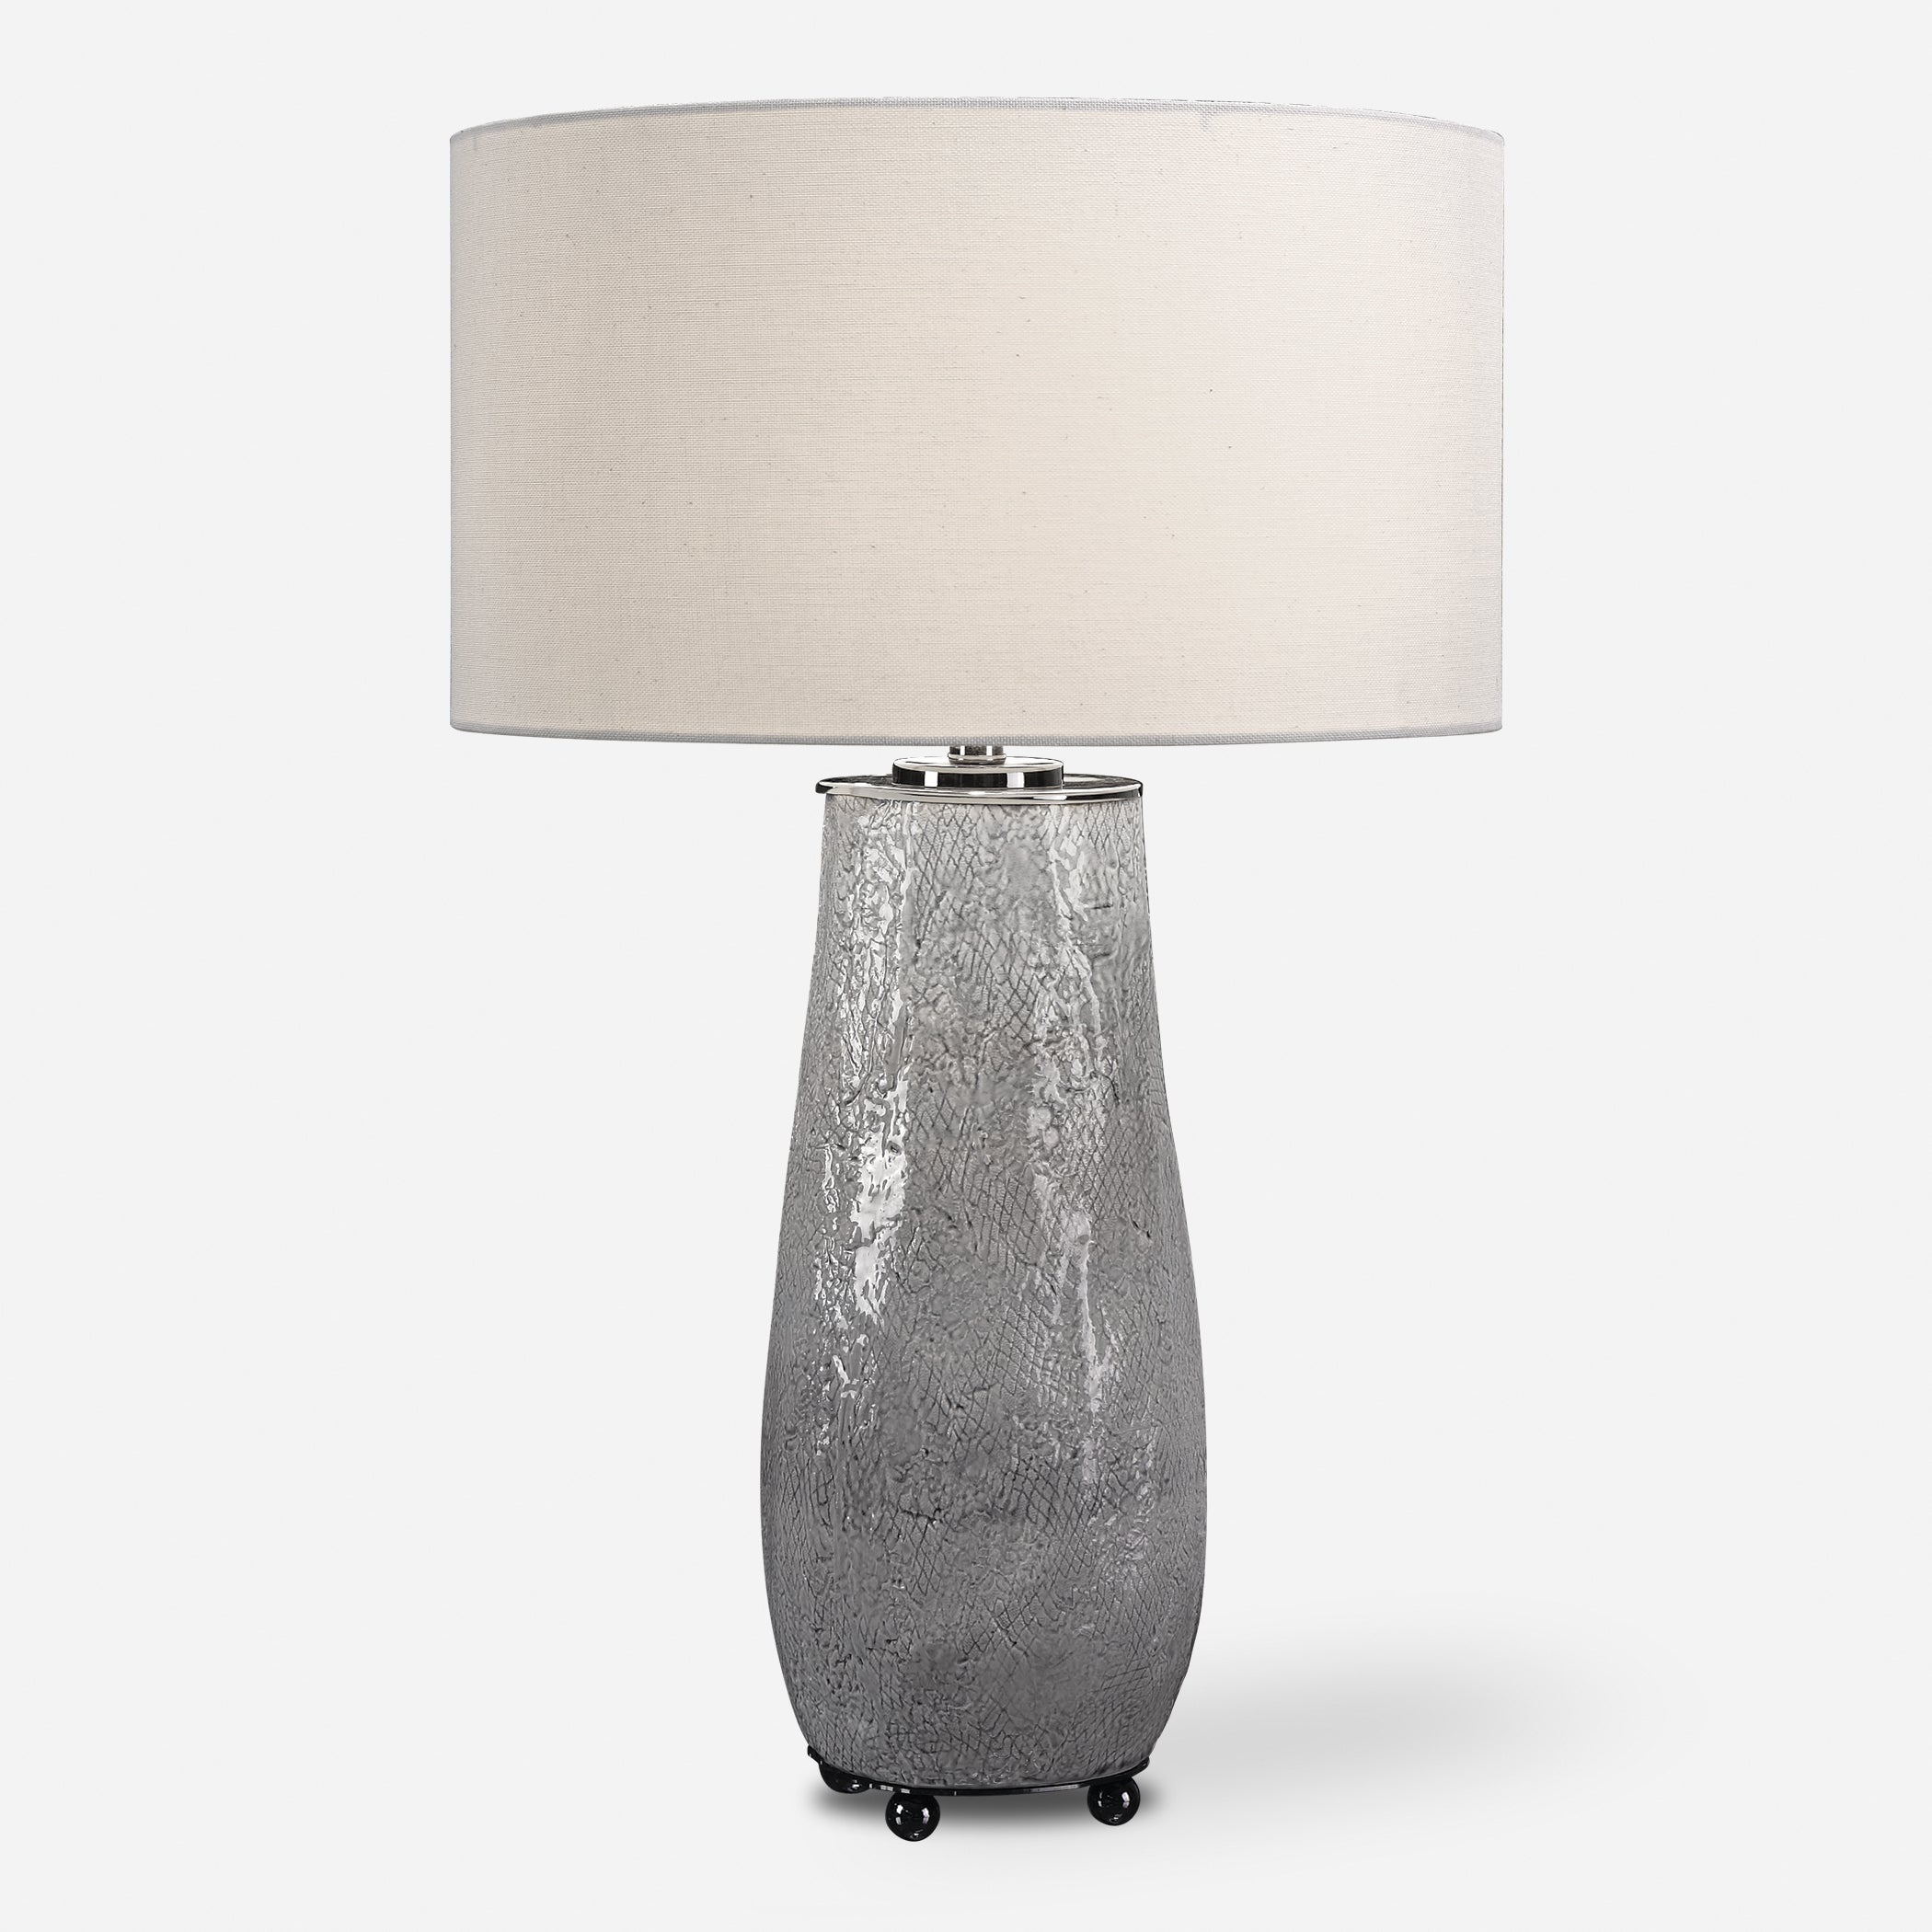 Uttermost Balkana Aged Gray Table Lamps Aged Gray Table Lamps Uttermost   